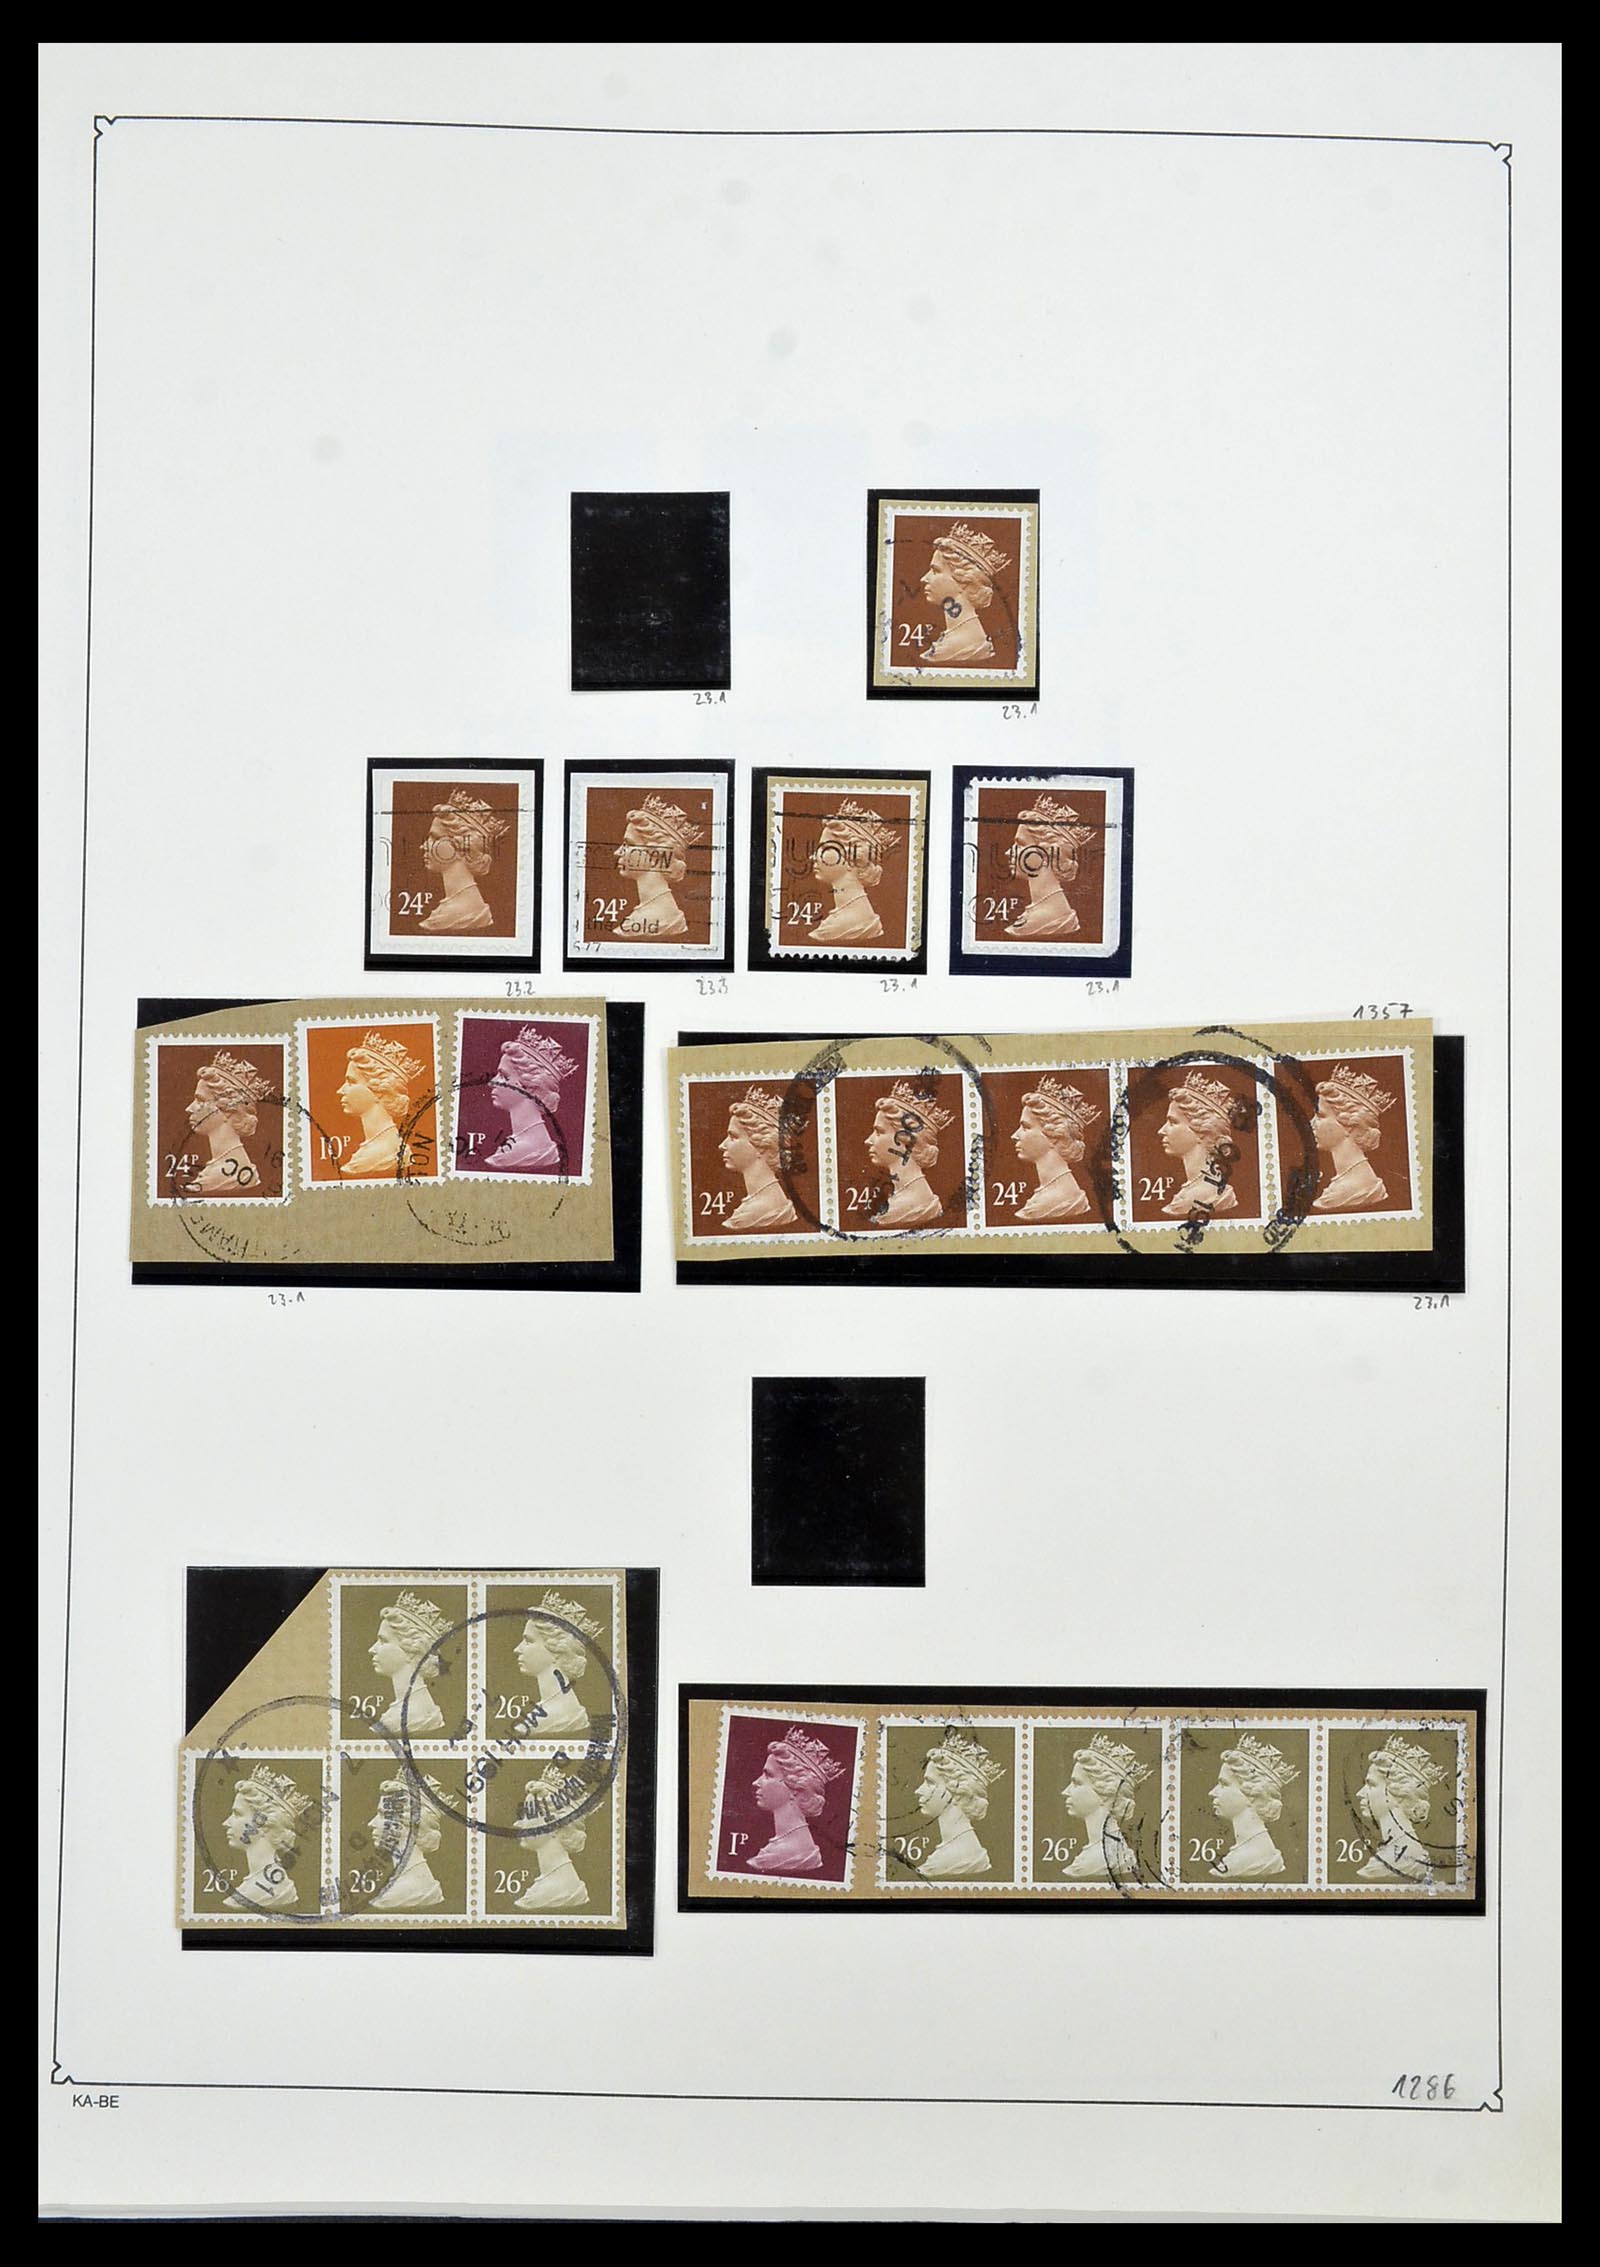 34221 099 - Stamp collection 34221 Great Britain Machins/castles 1971-2005.